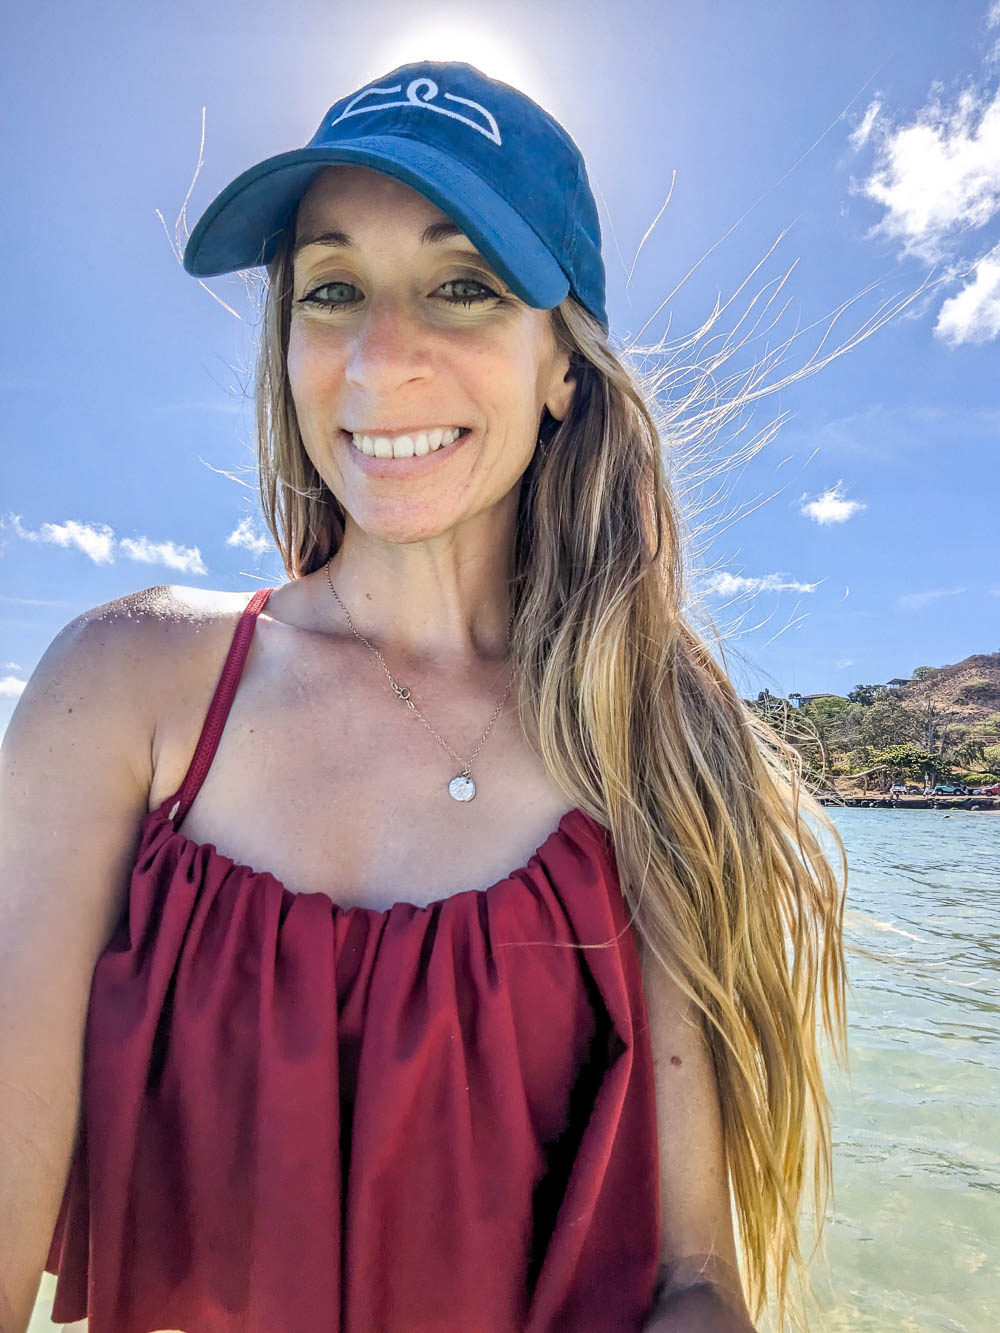 selfie of a woman in the sun wearing a red bathing suit and blue hat